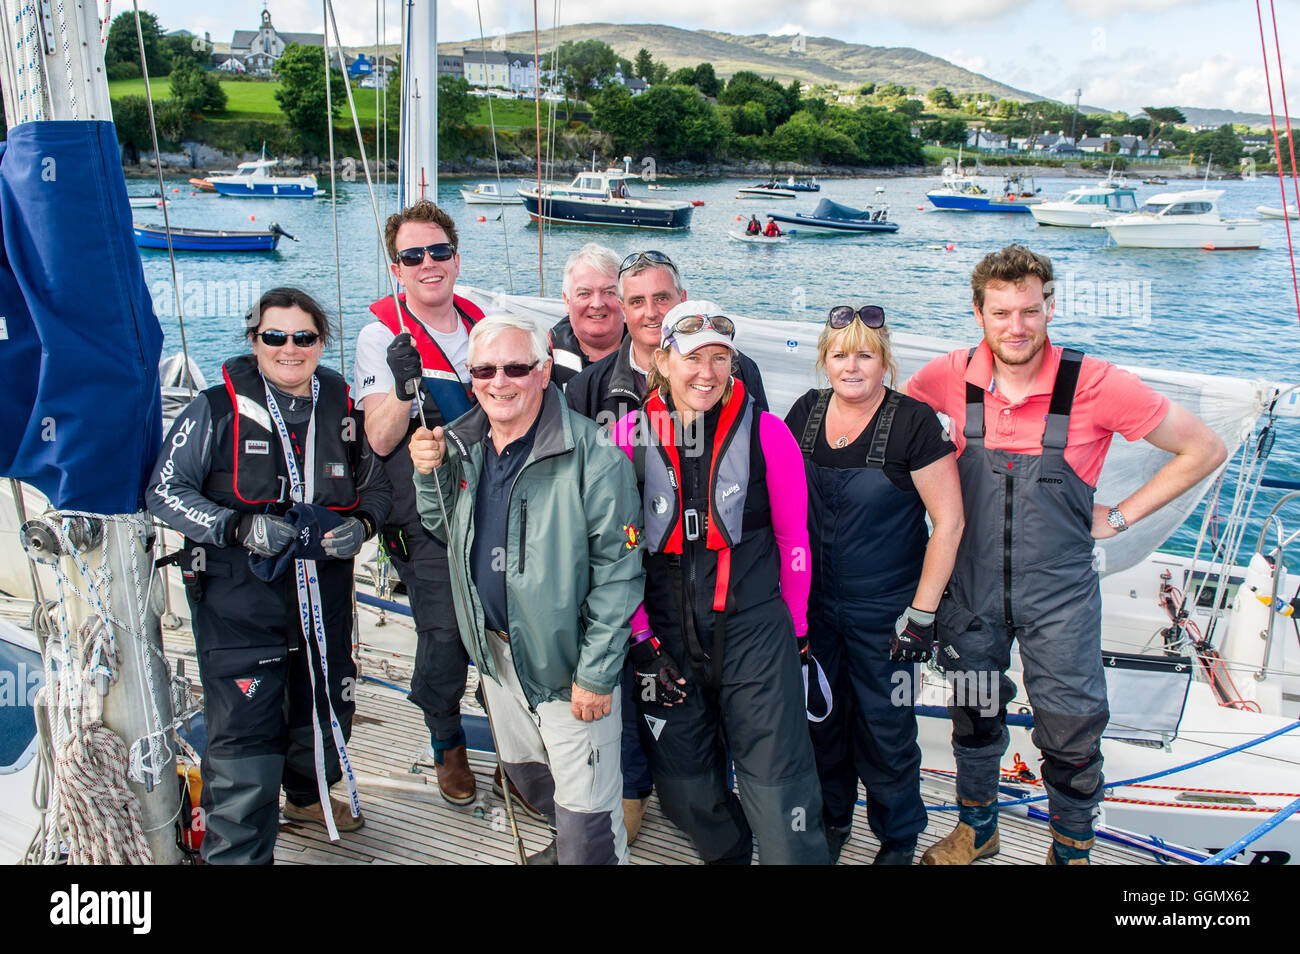 Schull, Ireland. 5th Aug, 2016.  On a very hot day during the annual Schull Regatta, the crew of Dublin based boat 'Powder Monkey', skippered by Chris Moore, Commodore of Dublin Bay Sailing Club , pose for the camera after finishing 4th in one of the Regatta races. The Regatta runs until Sunday, culminating in a firework display on Sunday night. Credit: Andy Gibson/Alamy Live News. Stock Photo